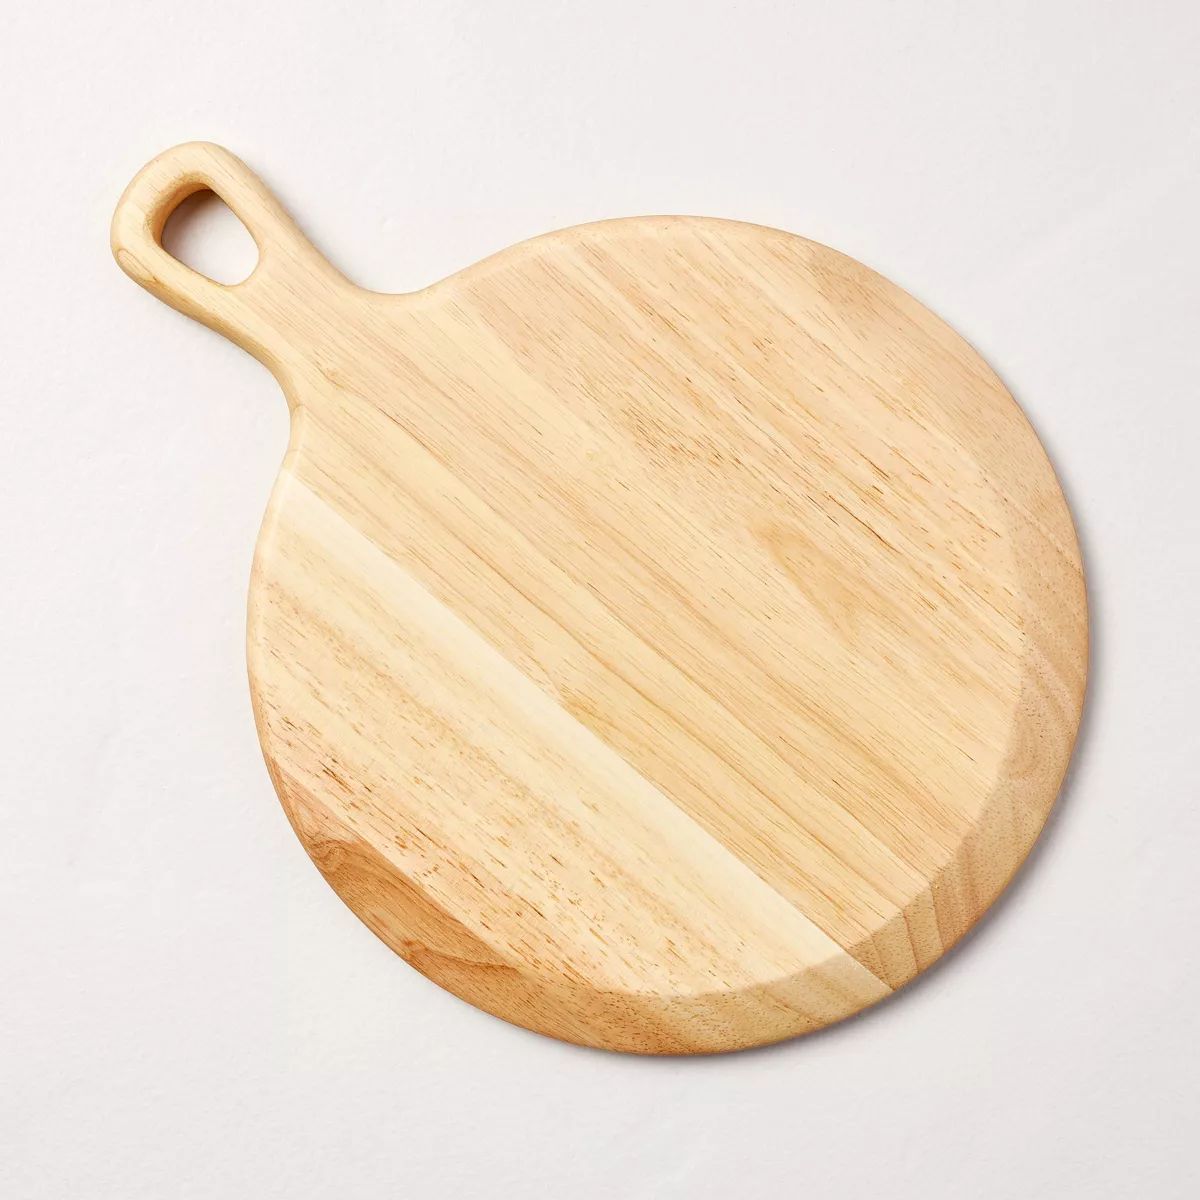 10" Round Wooden Paddle Serving Board - Hearth & Hand™ with Magnolia" " | Target